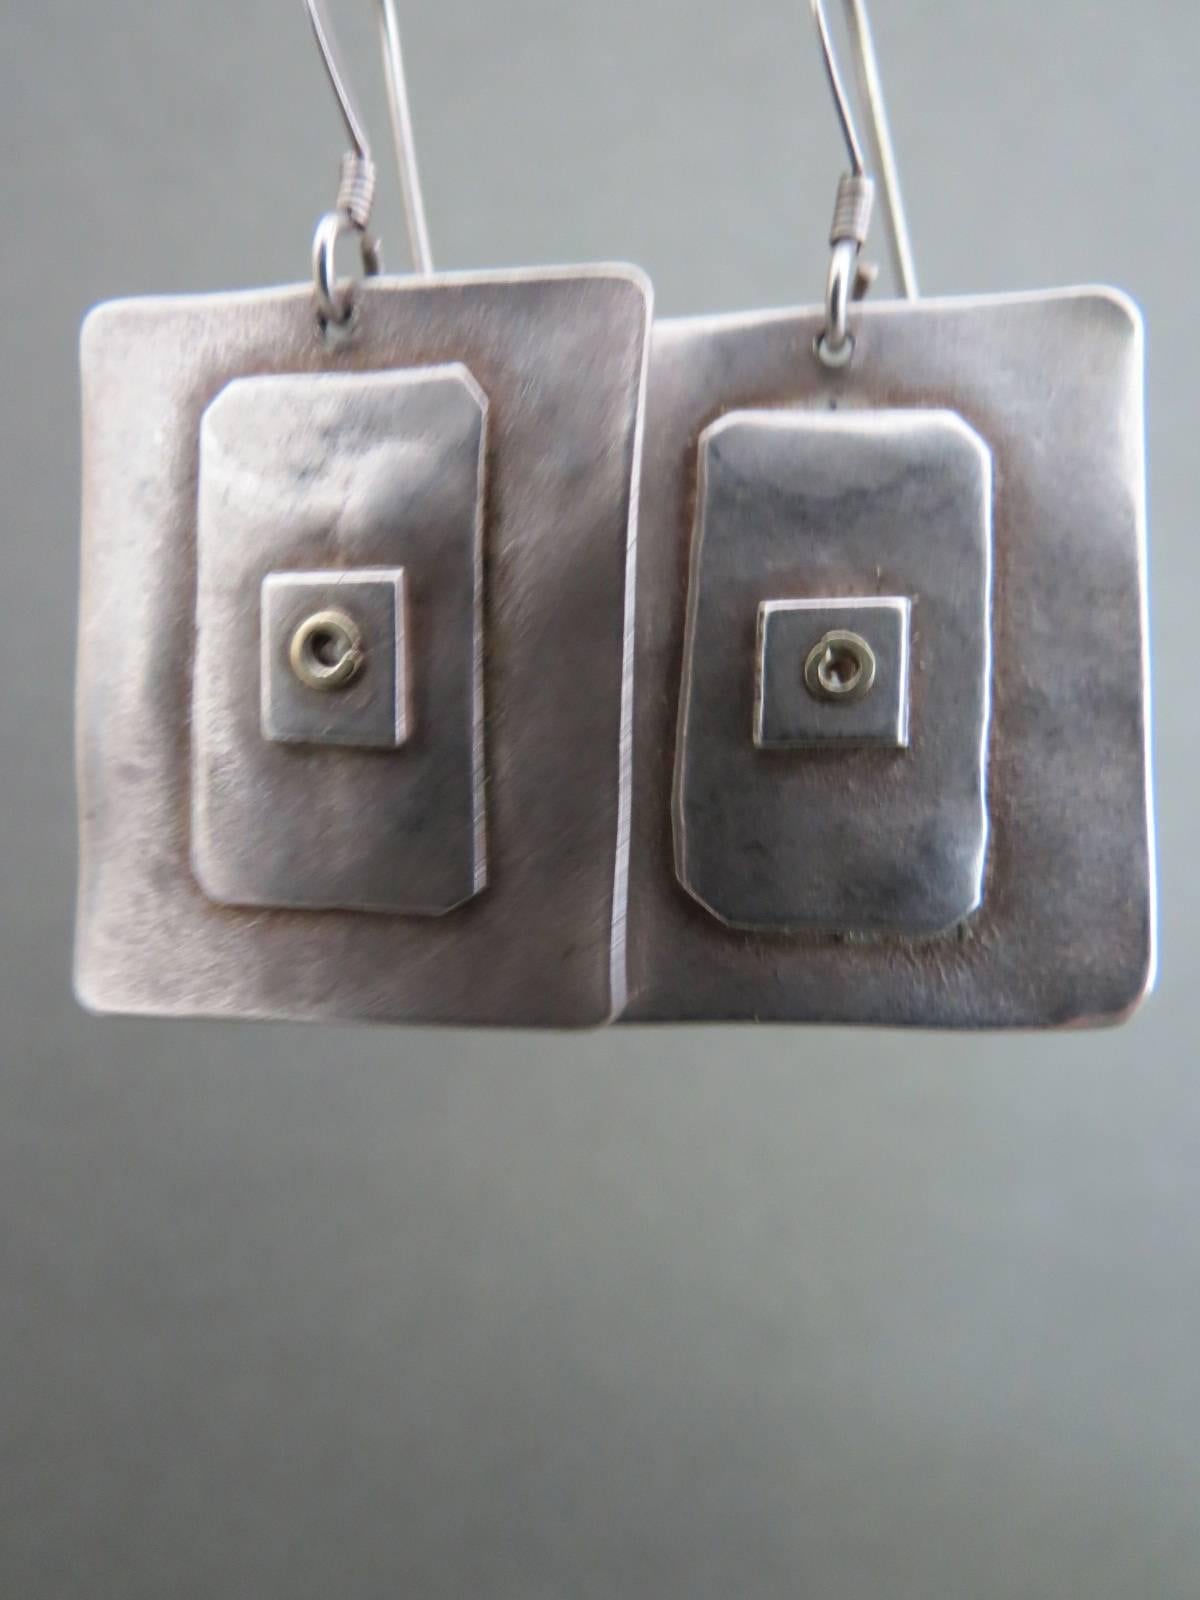 This vintage set of silver earrings would be lovely addition to your collection.
Item Specifics
Height: 4cm (approx 1.50